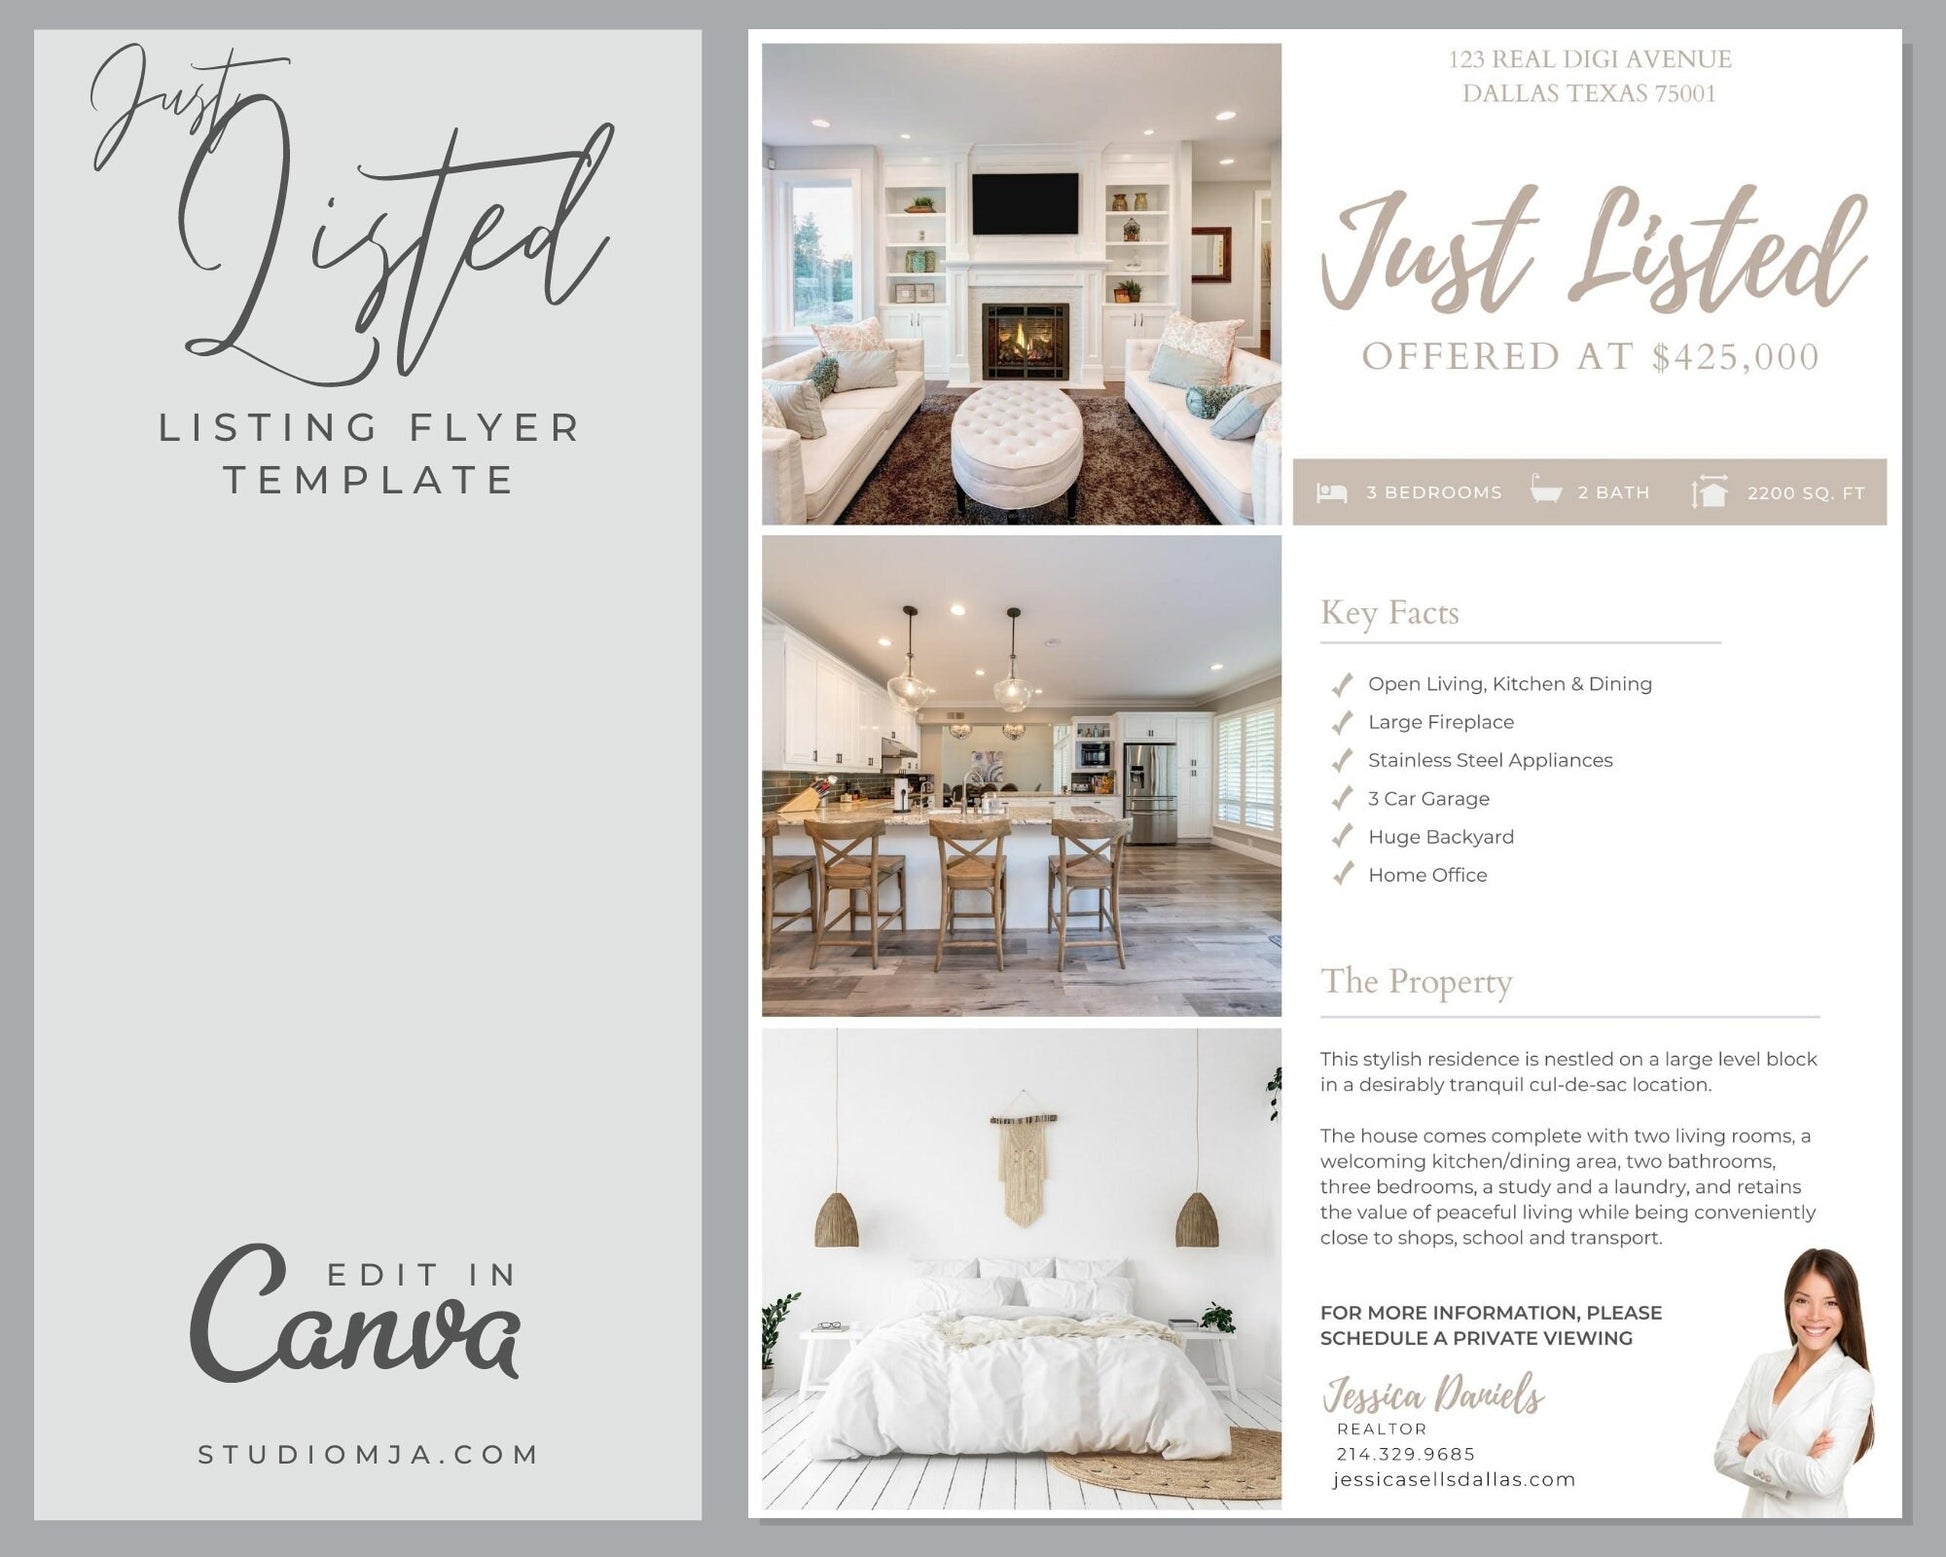 Real Estate Flyer Template | Canva Template | Real Estate Marketing  | Flyer Template